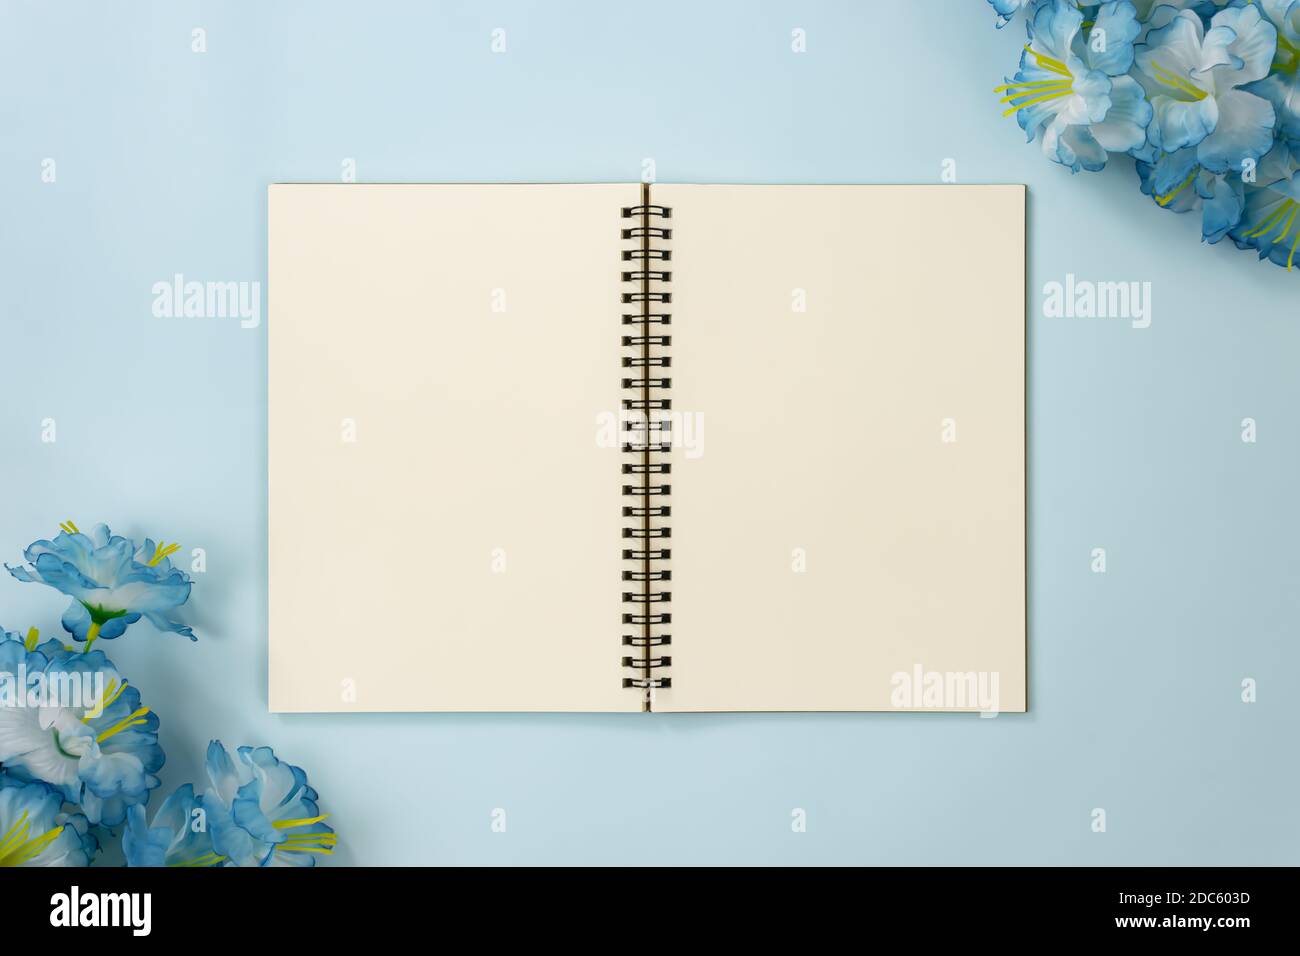 Top Table Spiral Notebook or Spring Notebook Mockup in Unlined Type on Center Frame and Blue Flowers at Bottom Left and Top Right Corner on Blue Paste Stock Photo